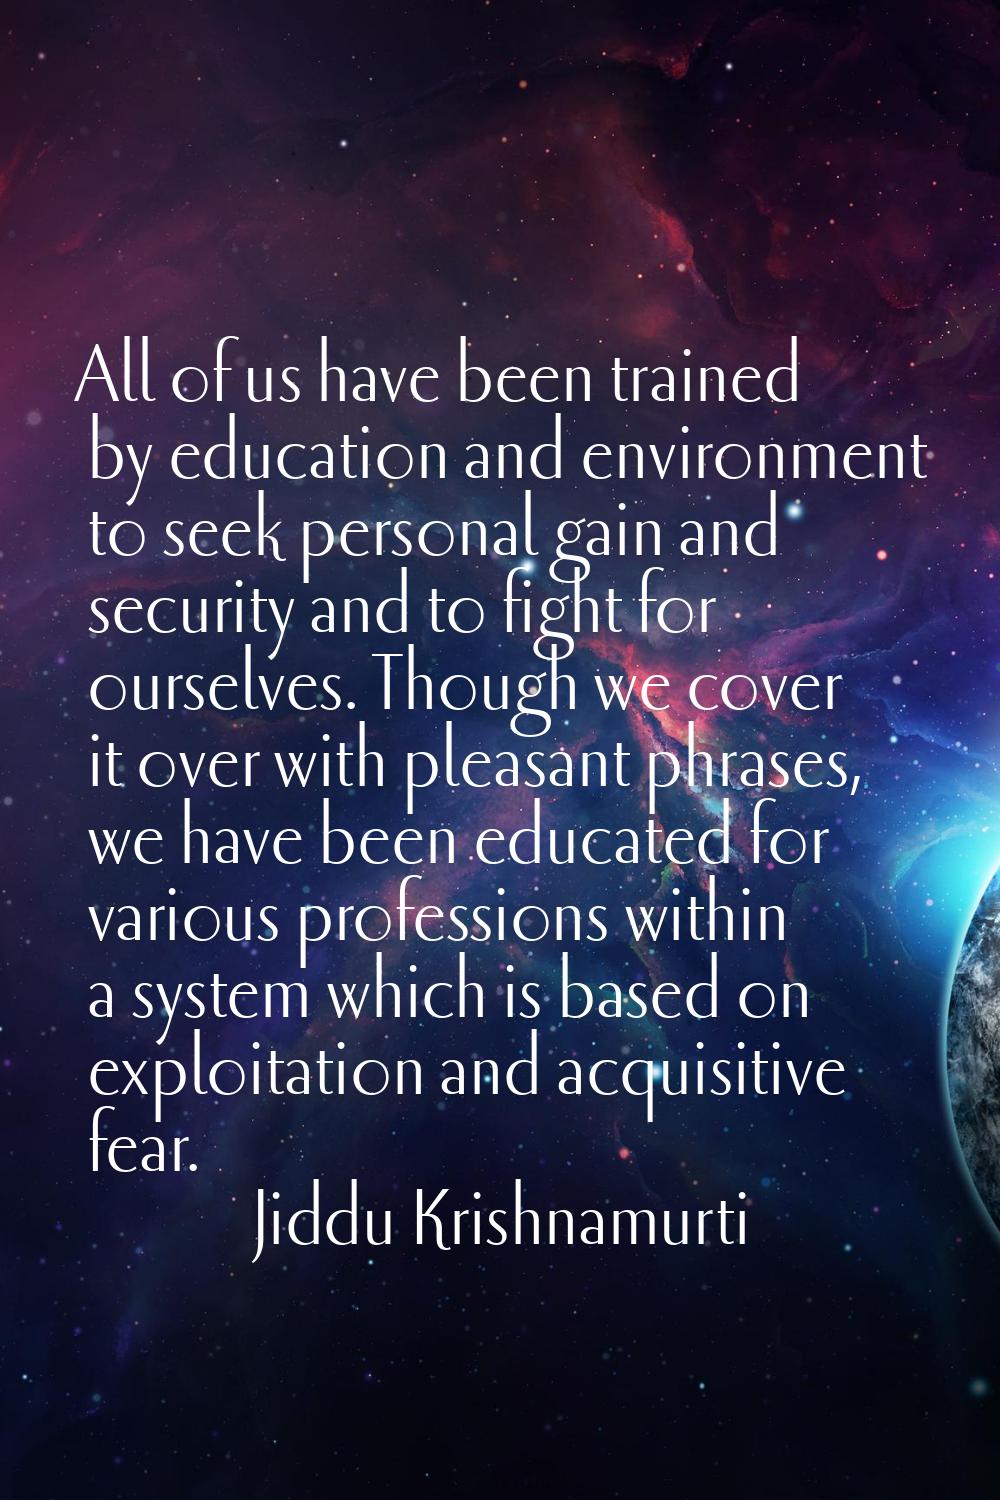 All of us have been trained by education and environment to seek personal gain and security and to 